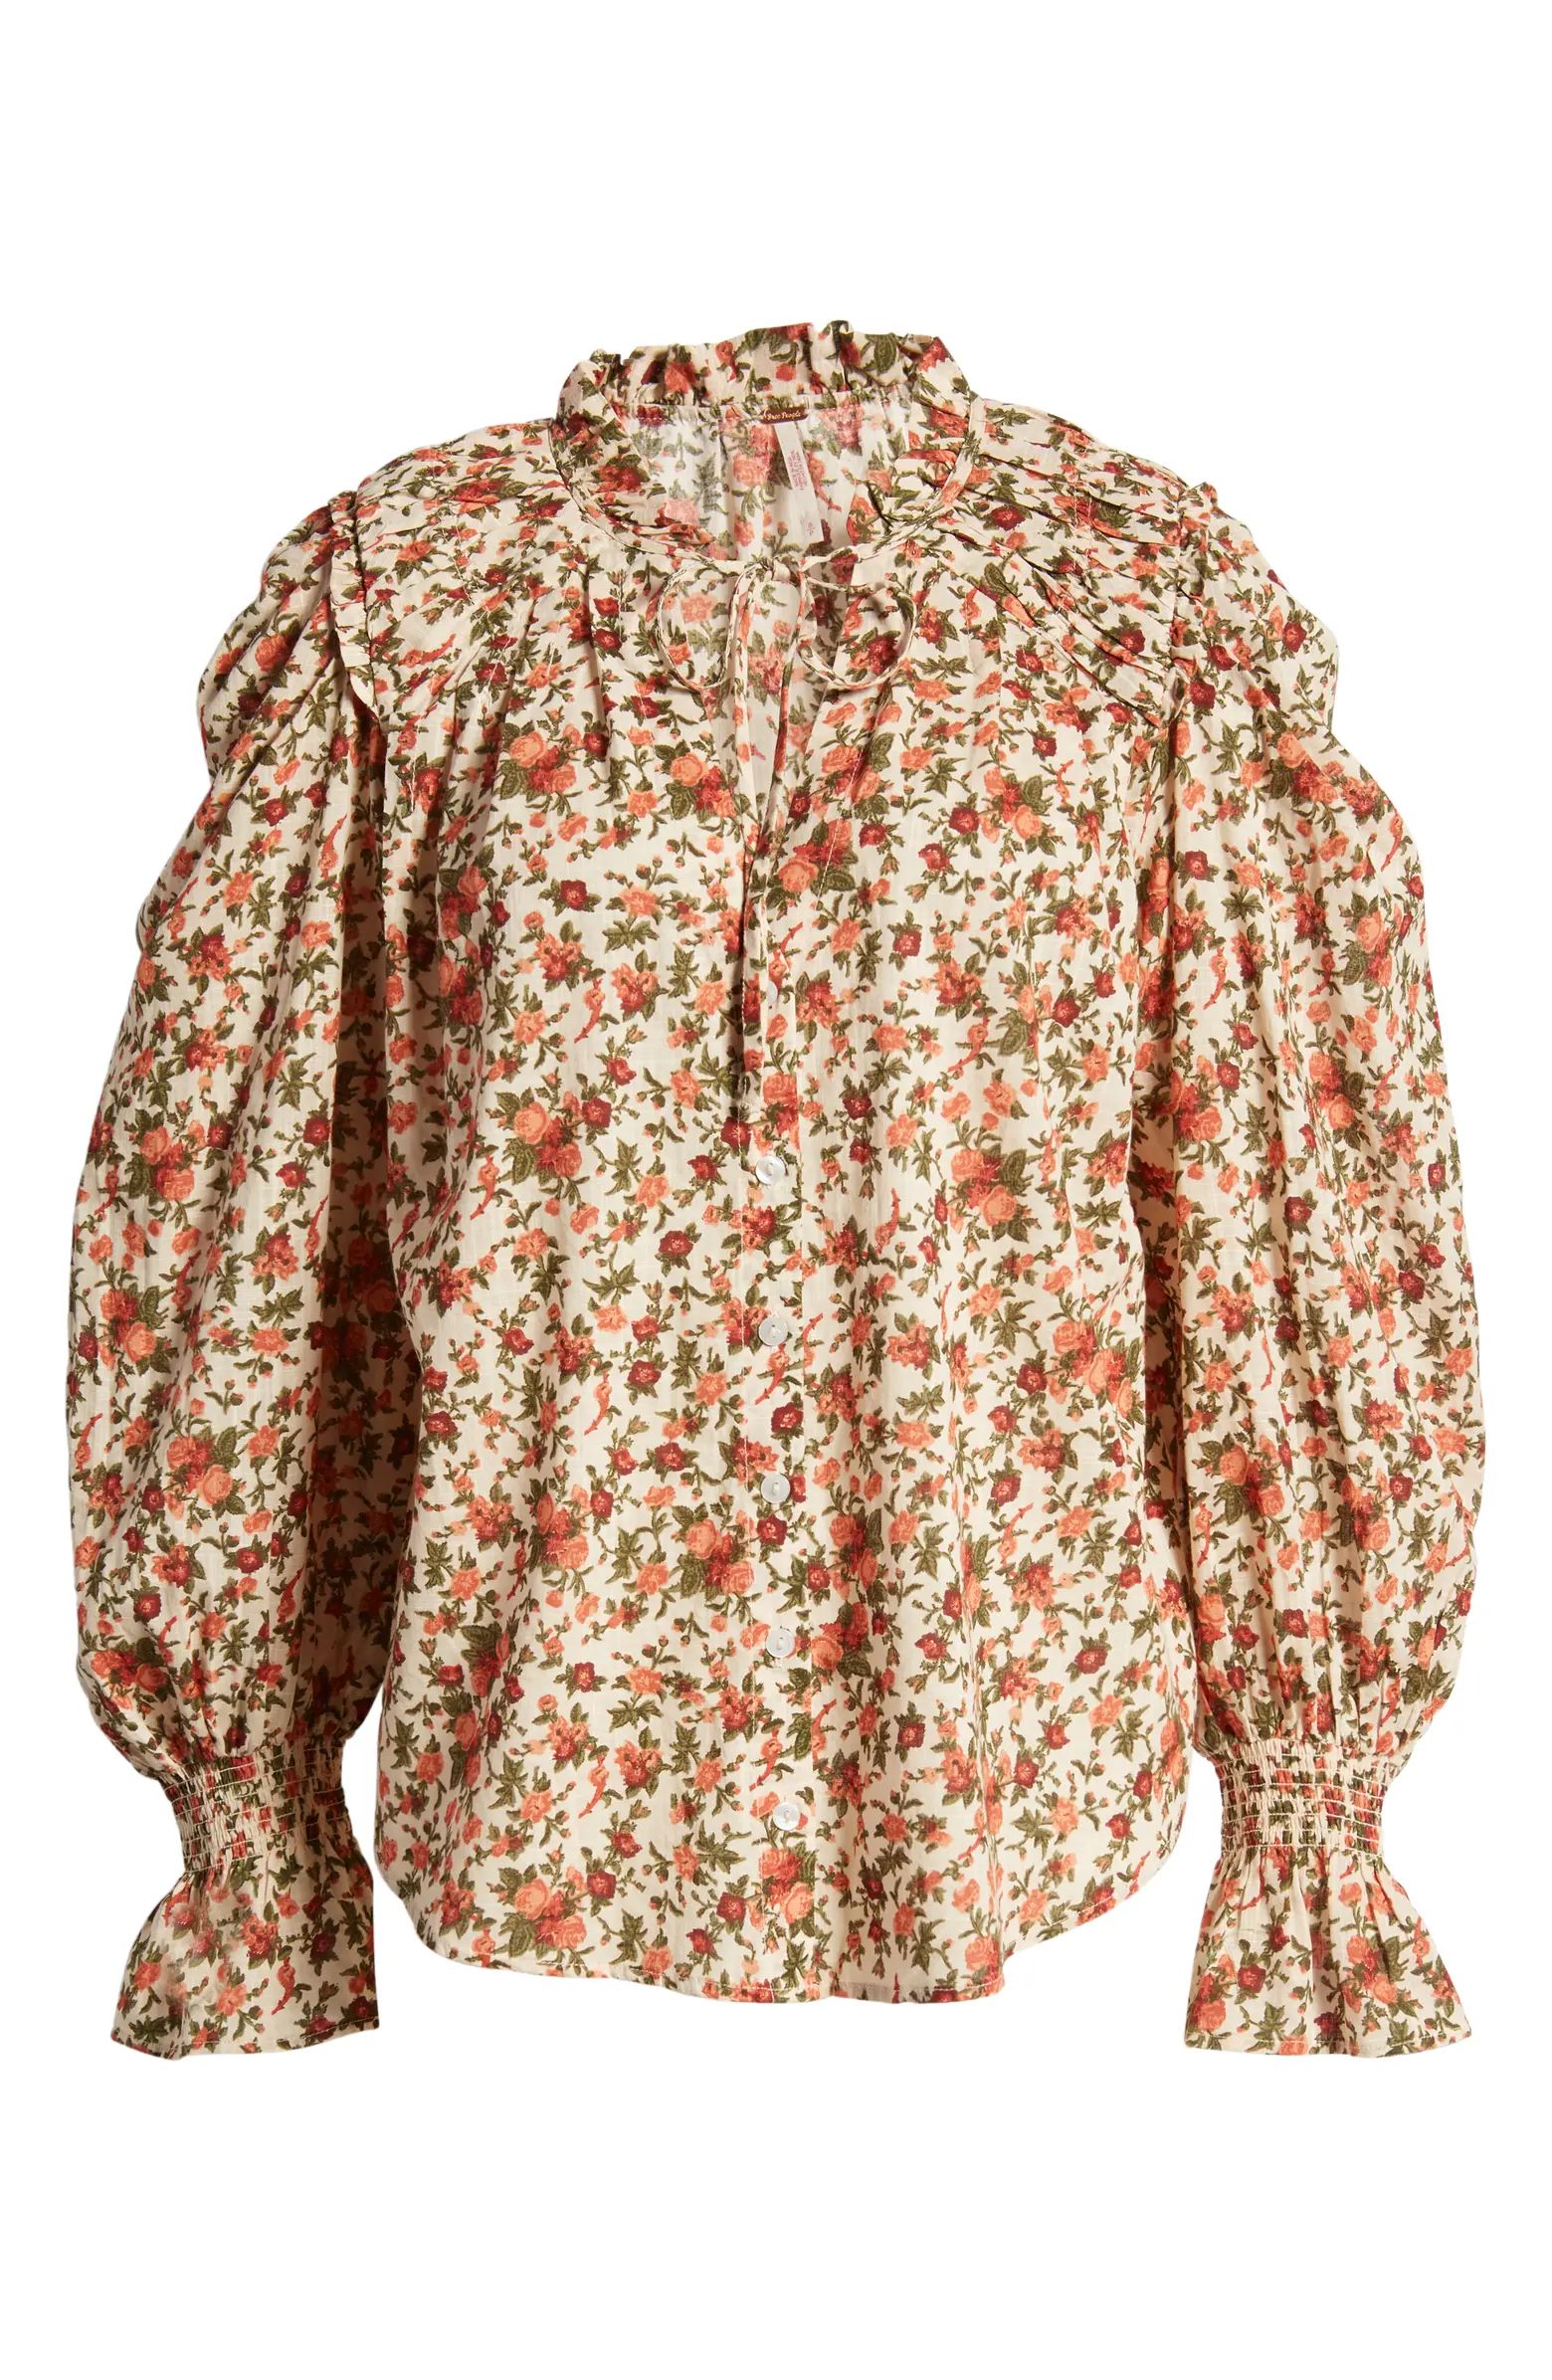 Meant To Be Floral Cotton Blouse | Nordstrom